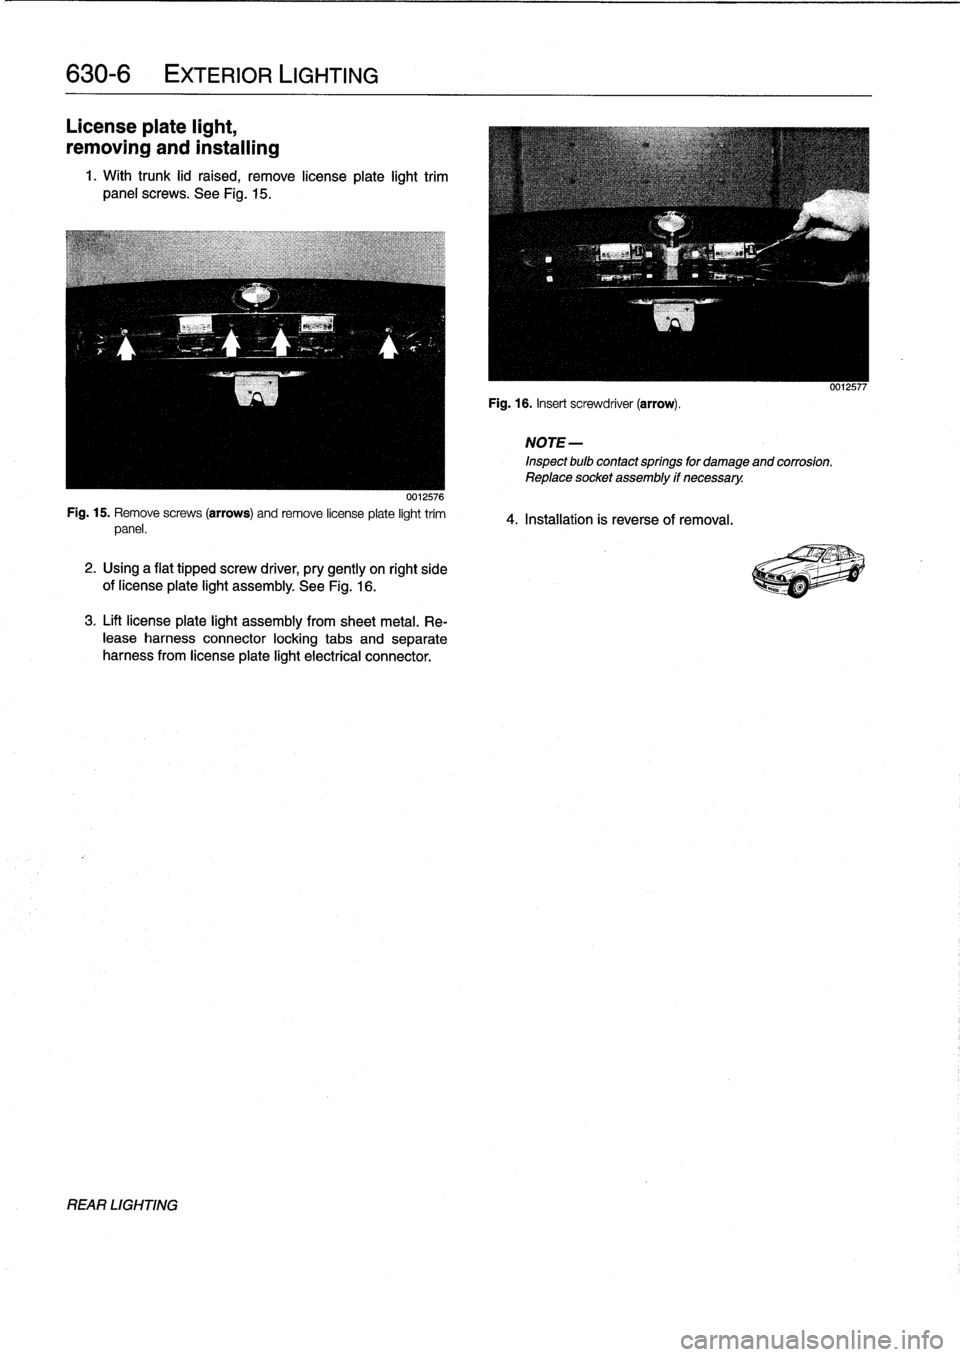 BMW 318i 1997 E36 Workshop Manual 
630-
6

	

EXTERIOR
LIGHTING

License
plate
light,

removing
and
installing

1
.
With
trunk
lid
raised,
remove
lícense
plate
light
trim
panel
screws
.
See
Fig
.
15
.

0012576
Fig
.
15
.
Remove
screw